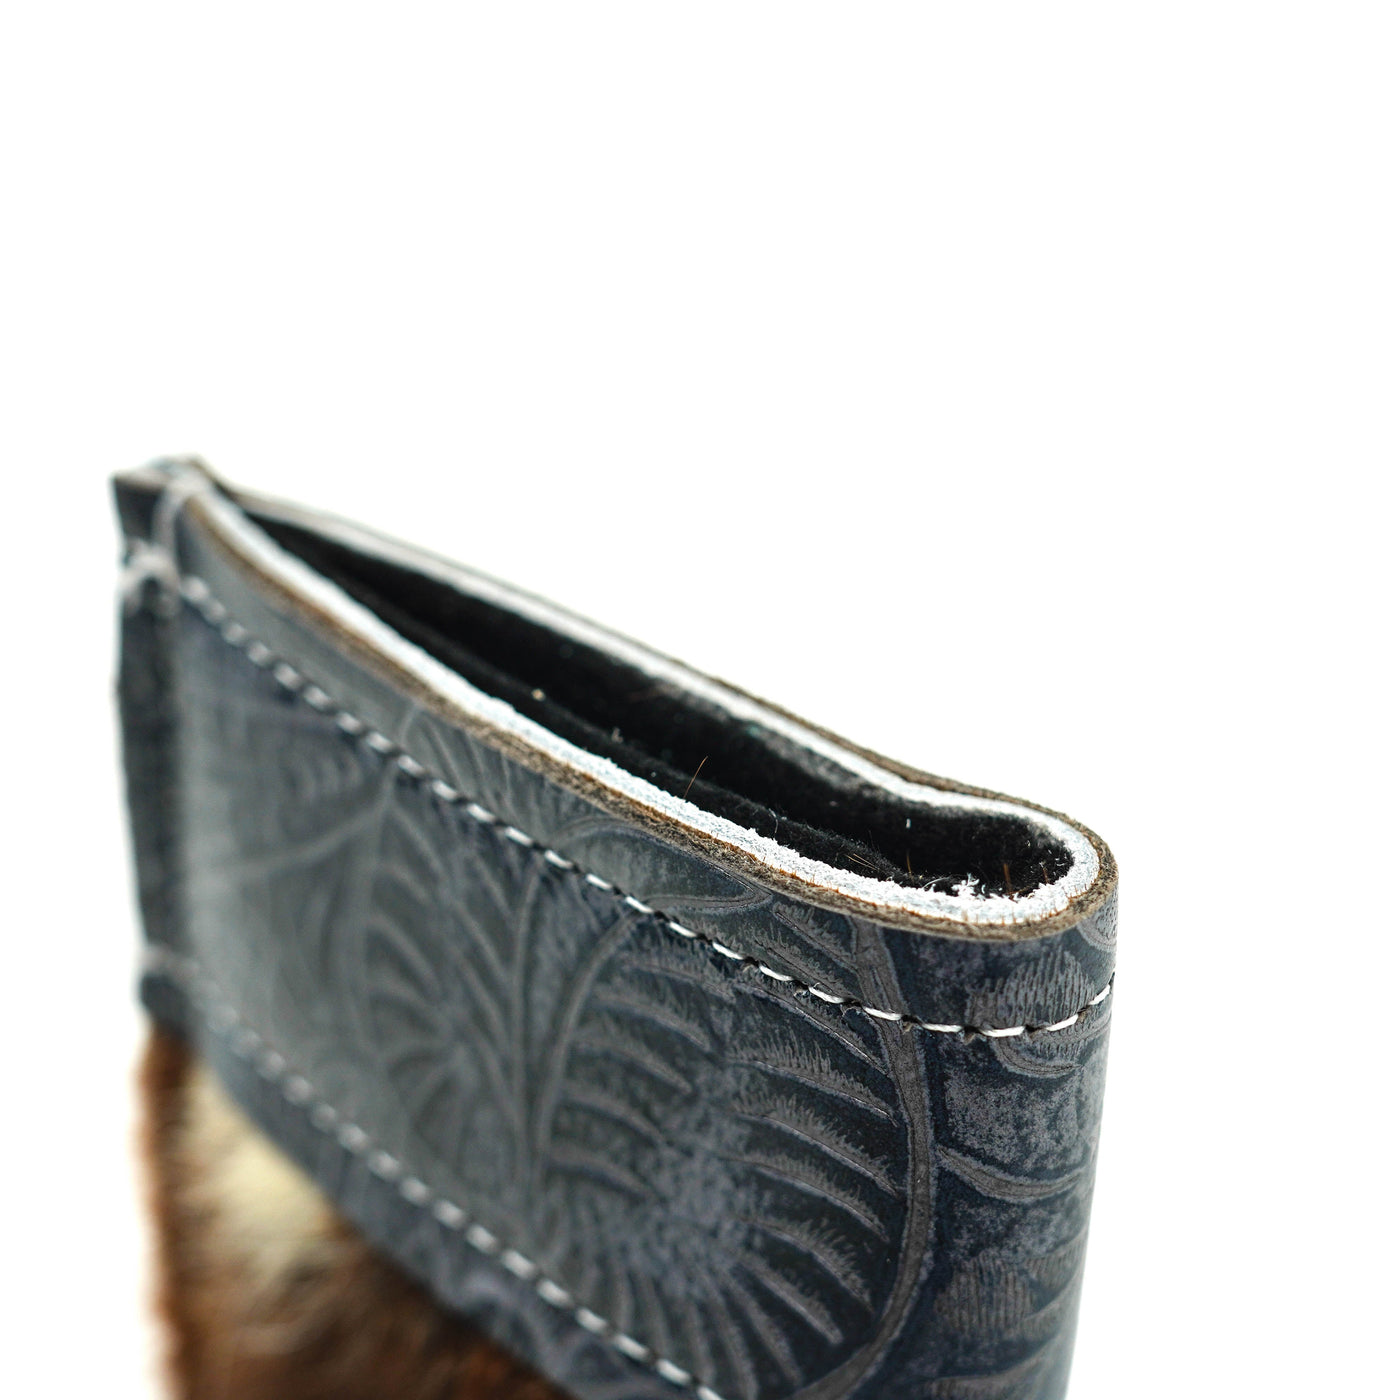 Sunglass Case - Roan w/ Blue Jean Tool-Sunglass Case-Western-Cowhide-Bags-Handmade-Products-Gifts-Dancing Cactus Designs